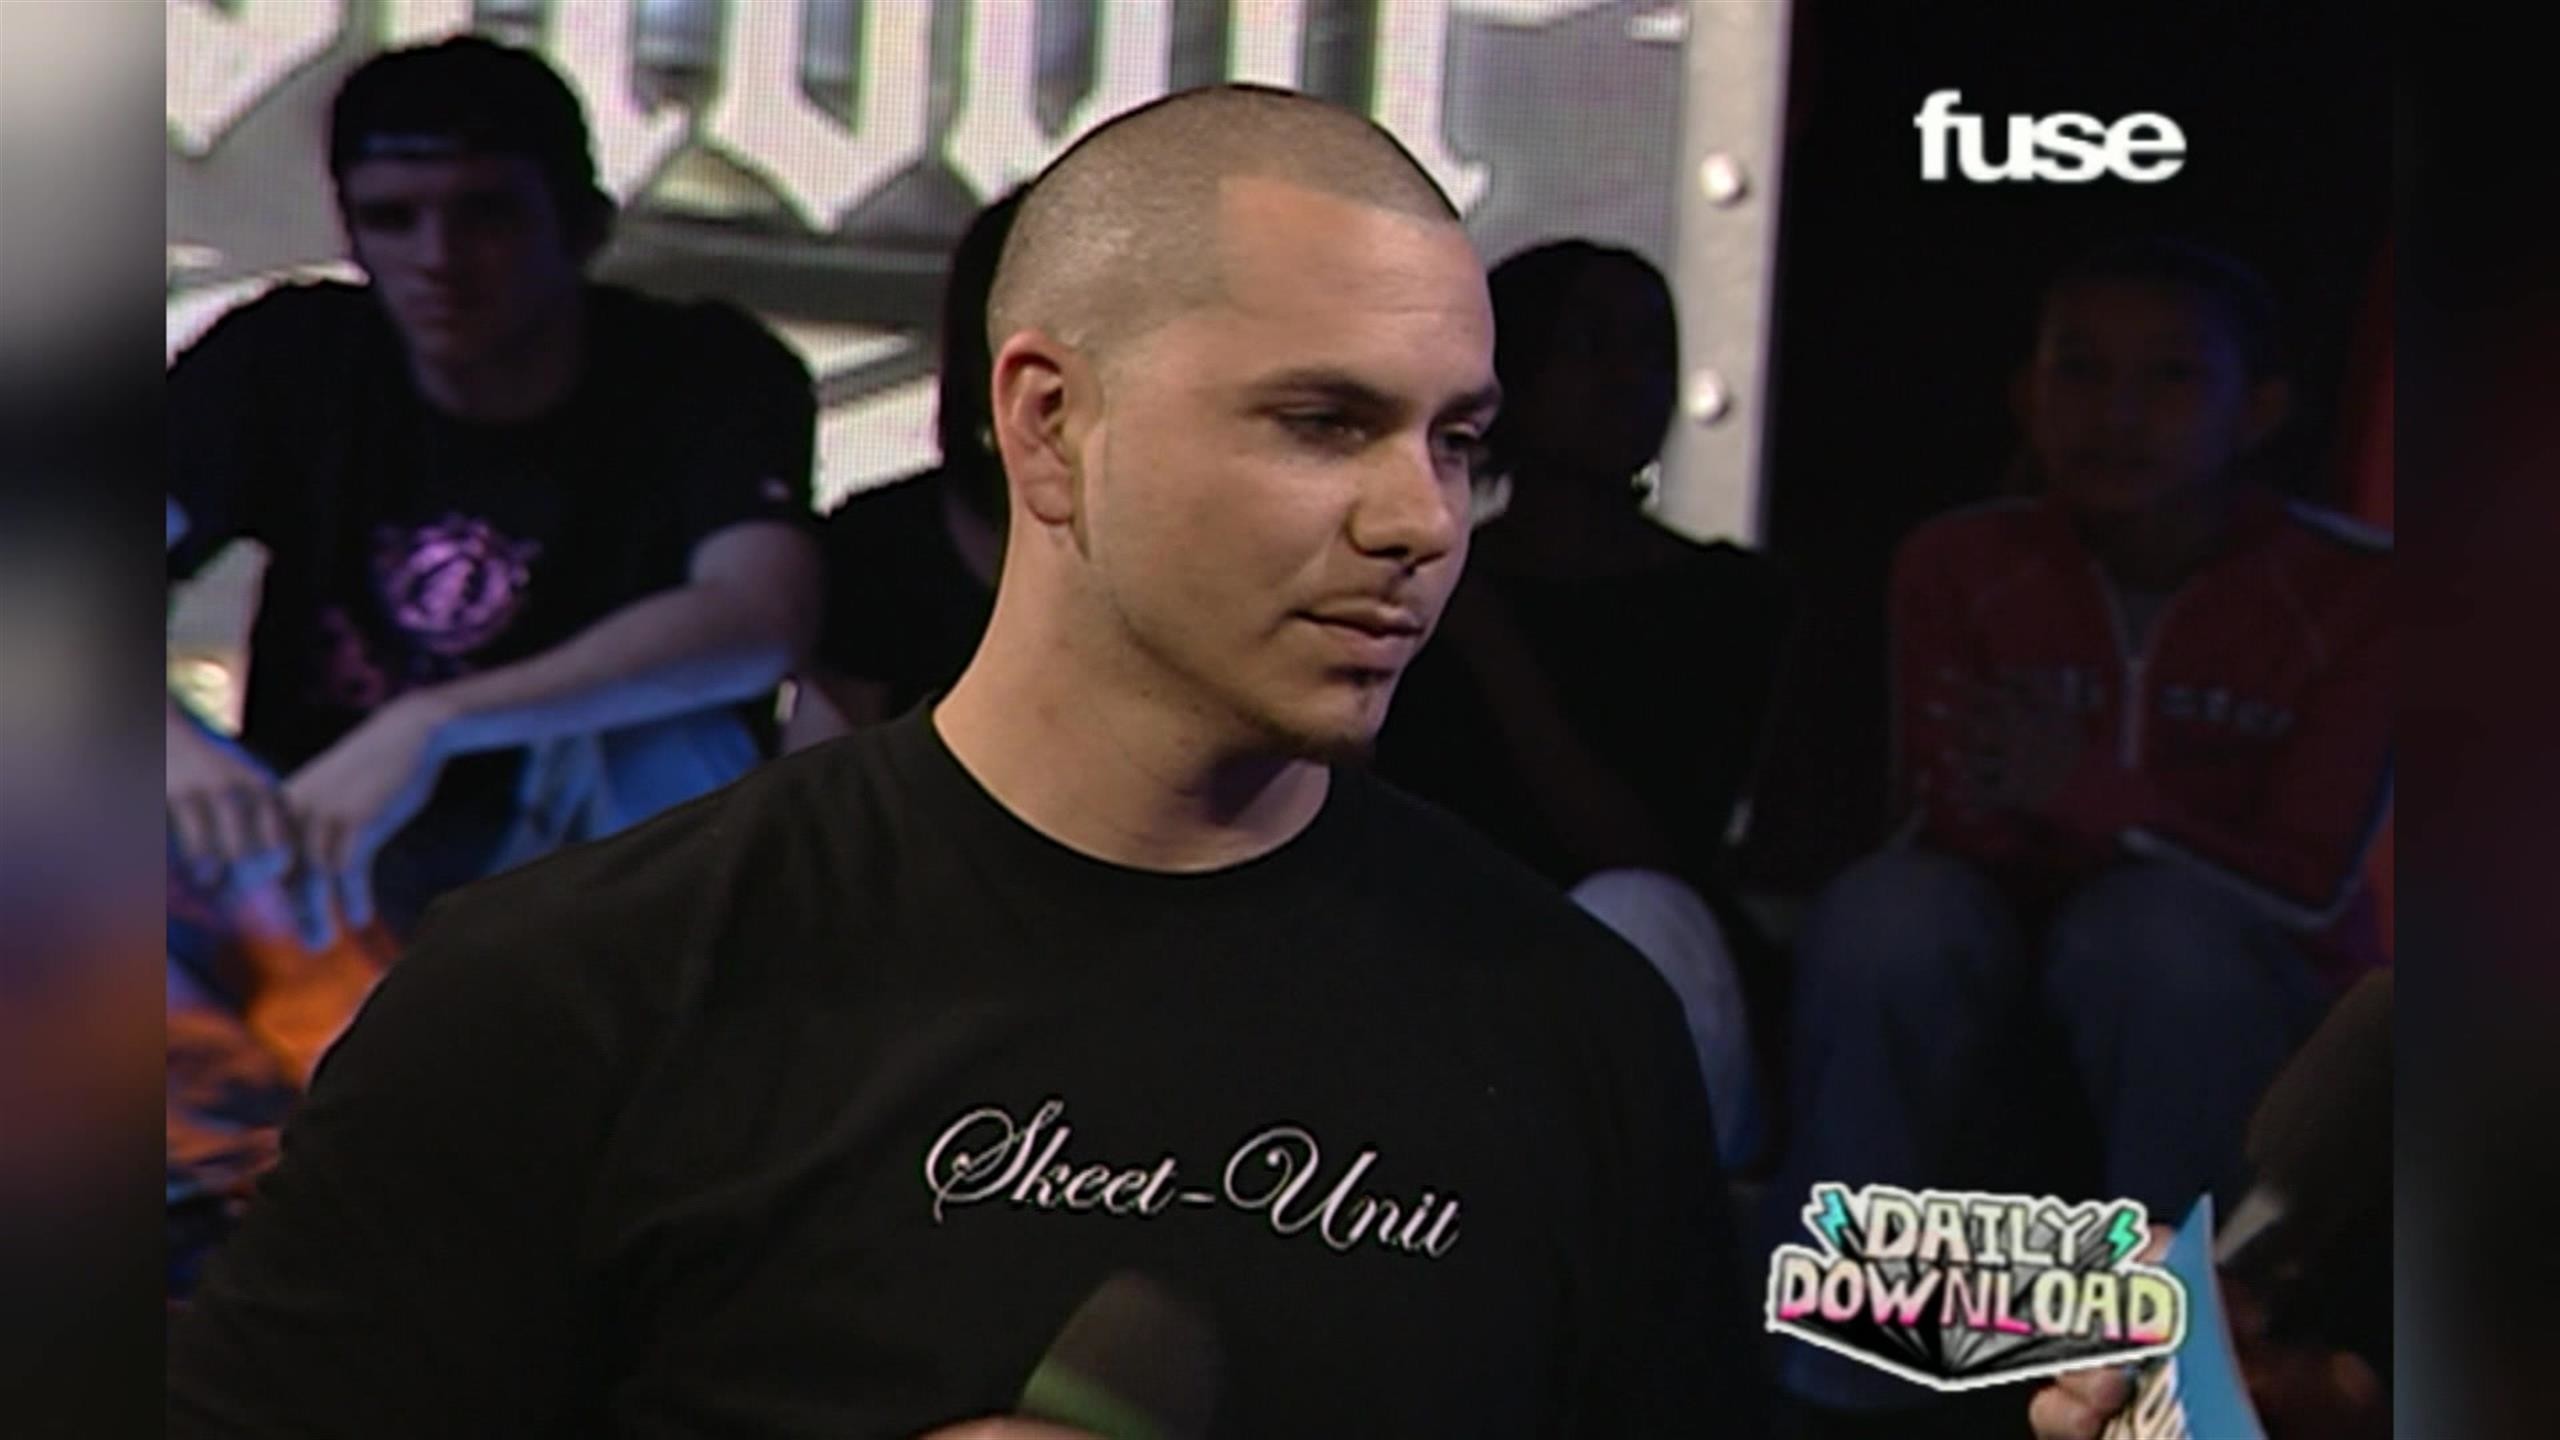 2560x1440 #TBT 2005: Pitbull Reveals the Meaning Behind His Name - Fuse